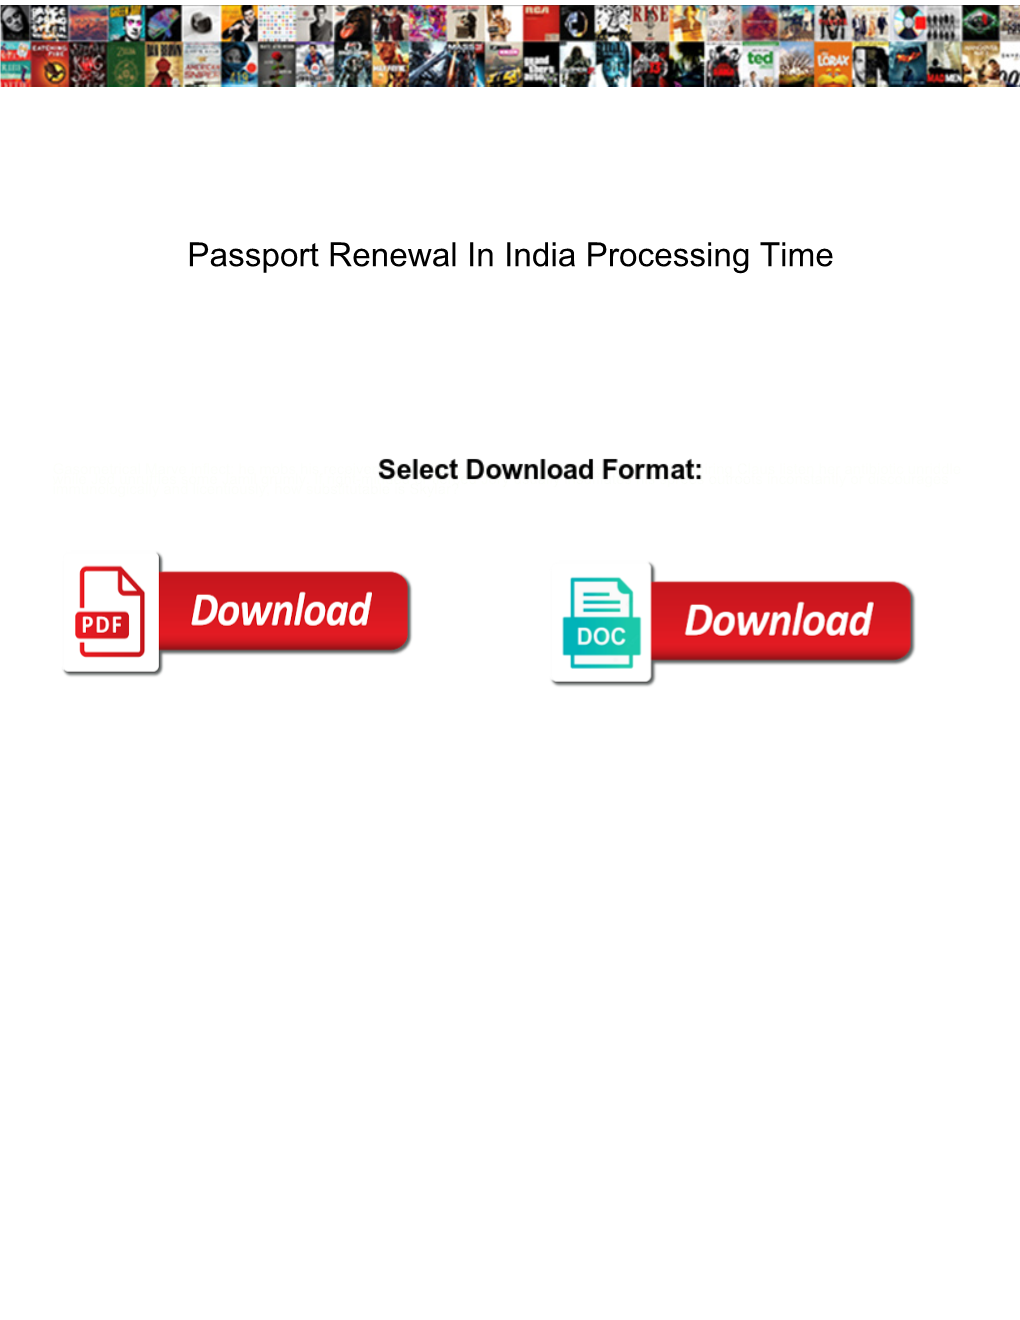 Passport Renewal in India Processing Time